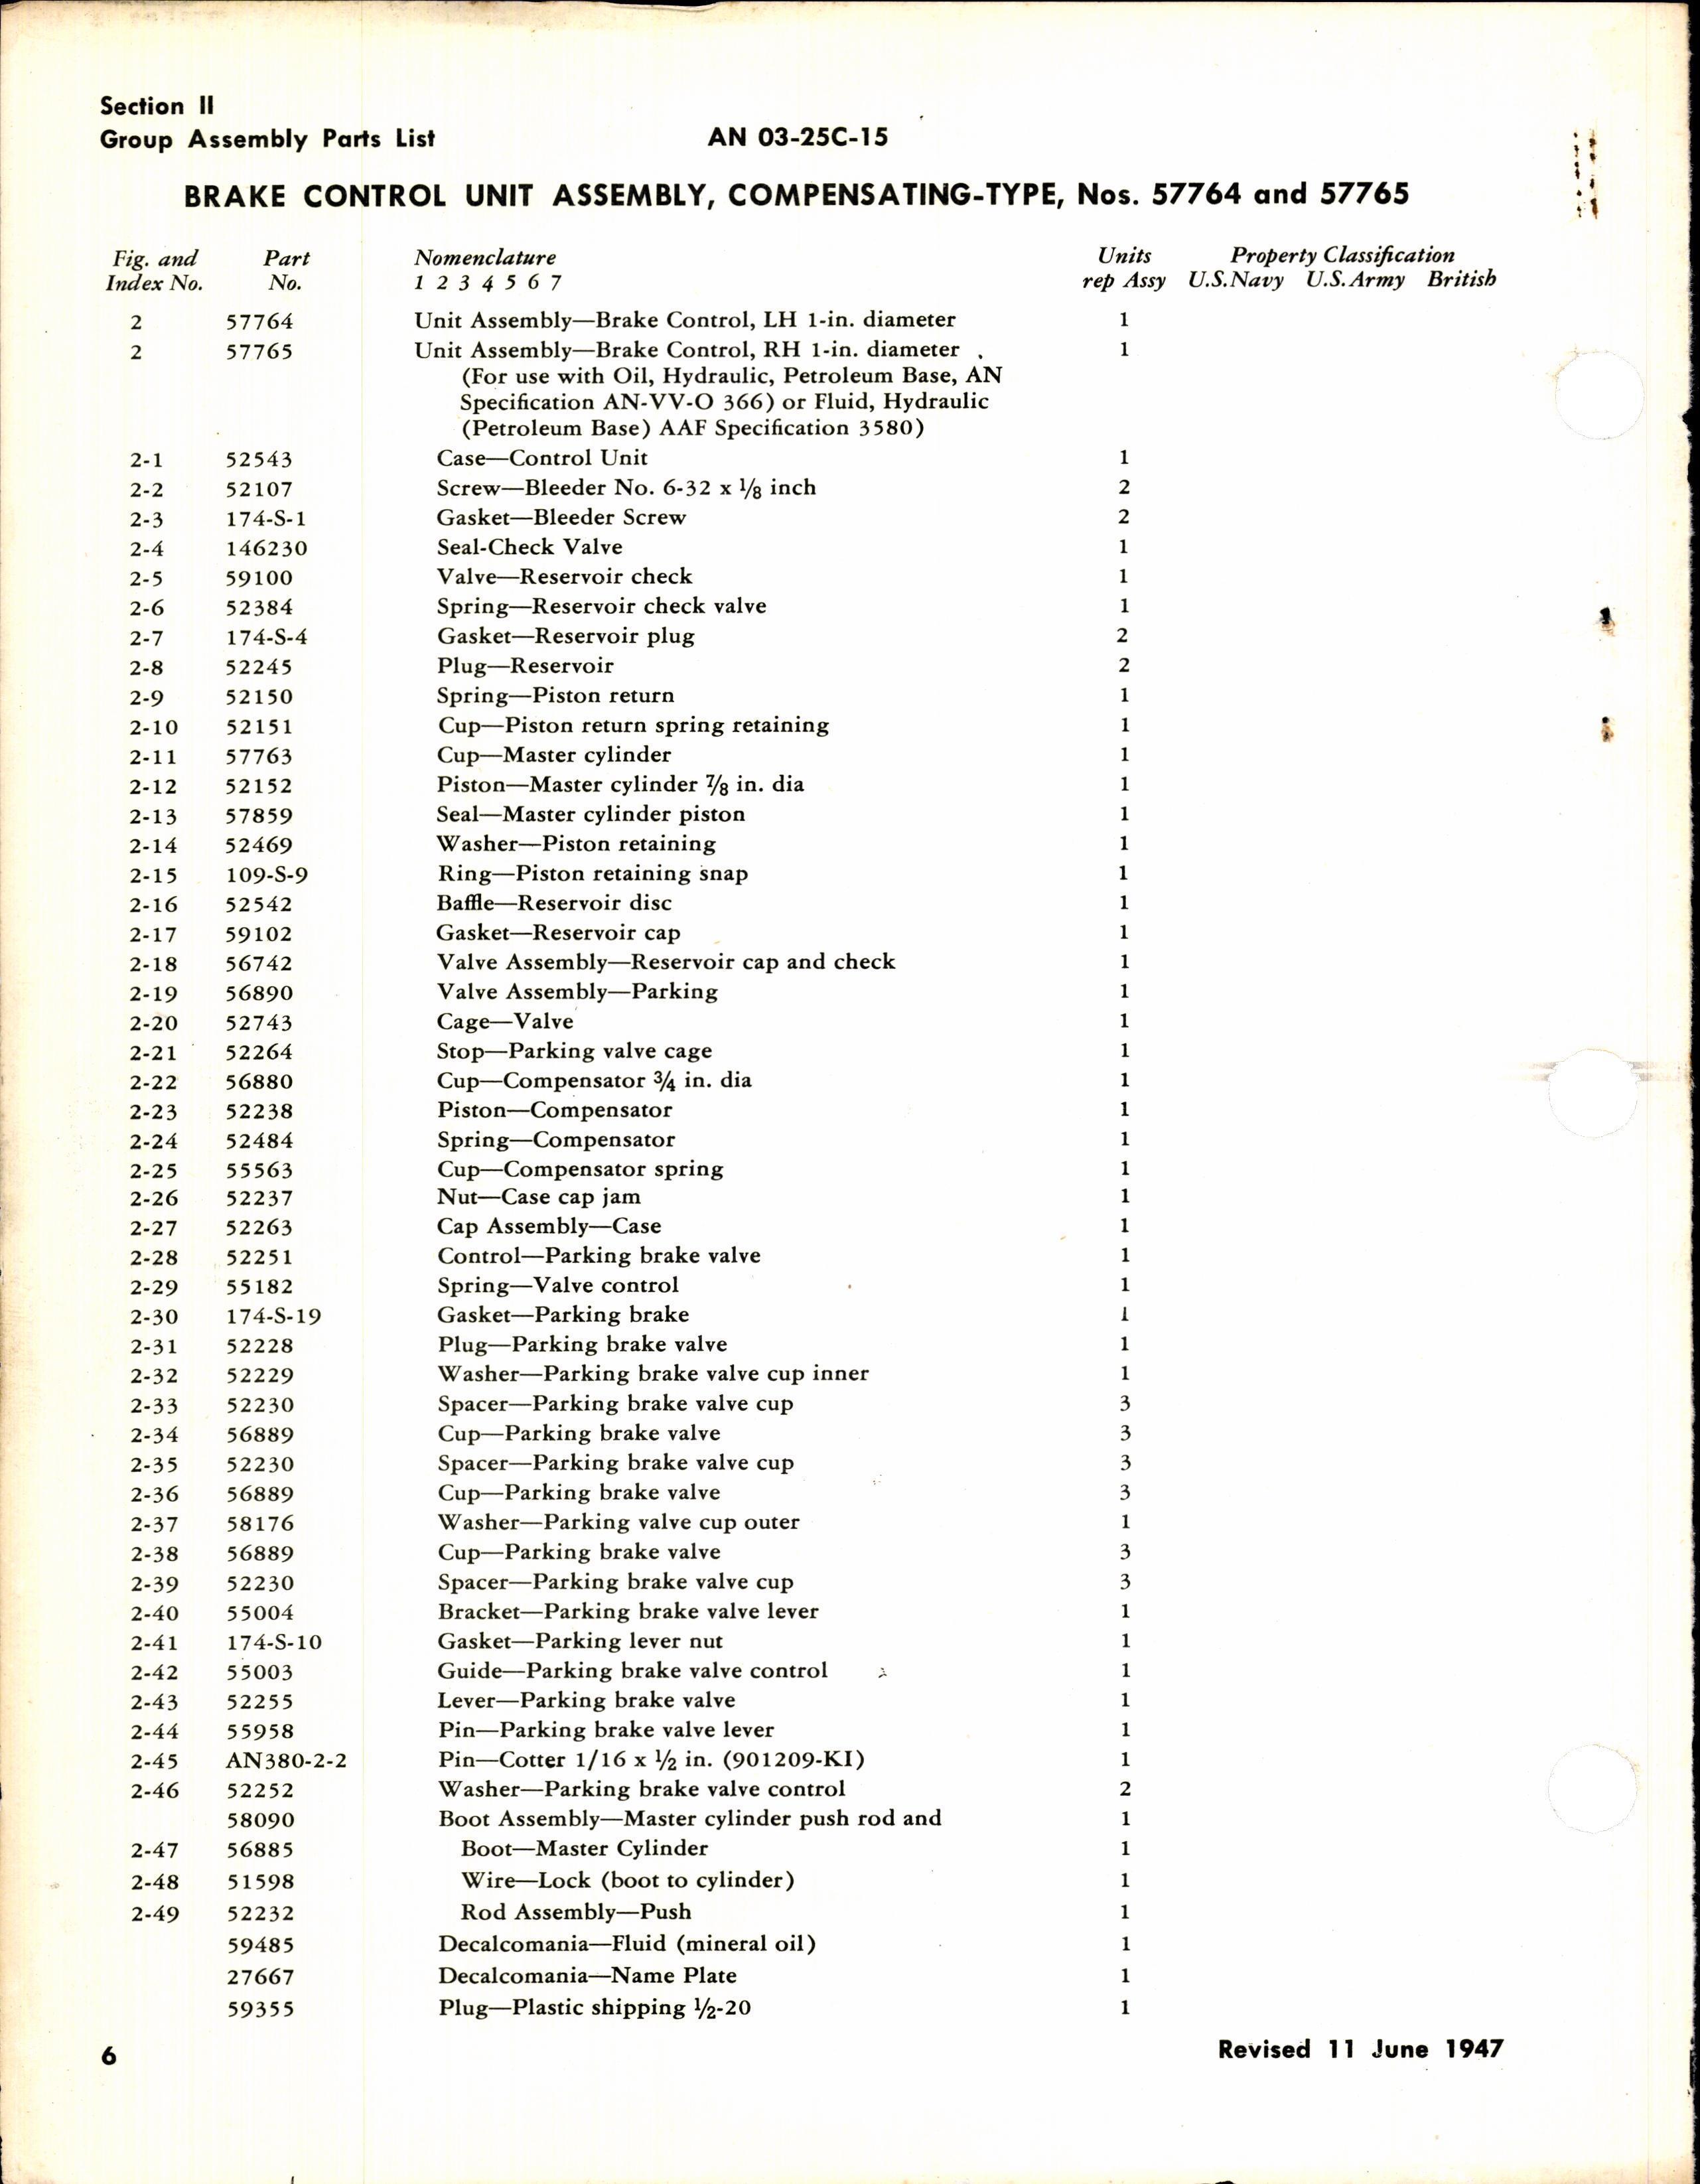 Sample page 4 from AirCorps Library document: Parts Catalog for Bendix Master Brake Cylinders